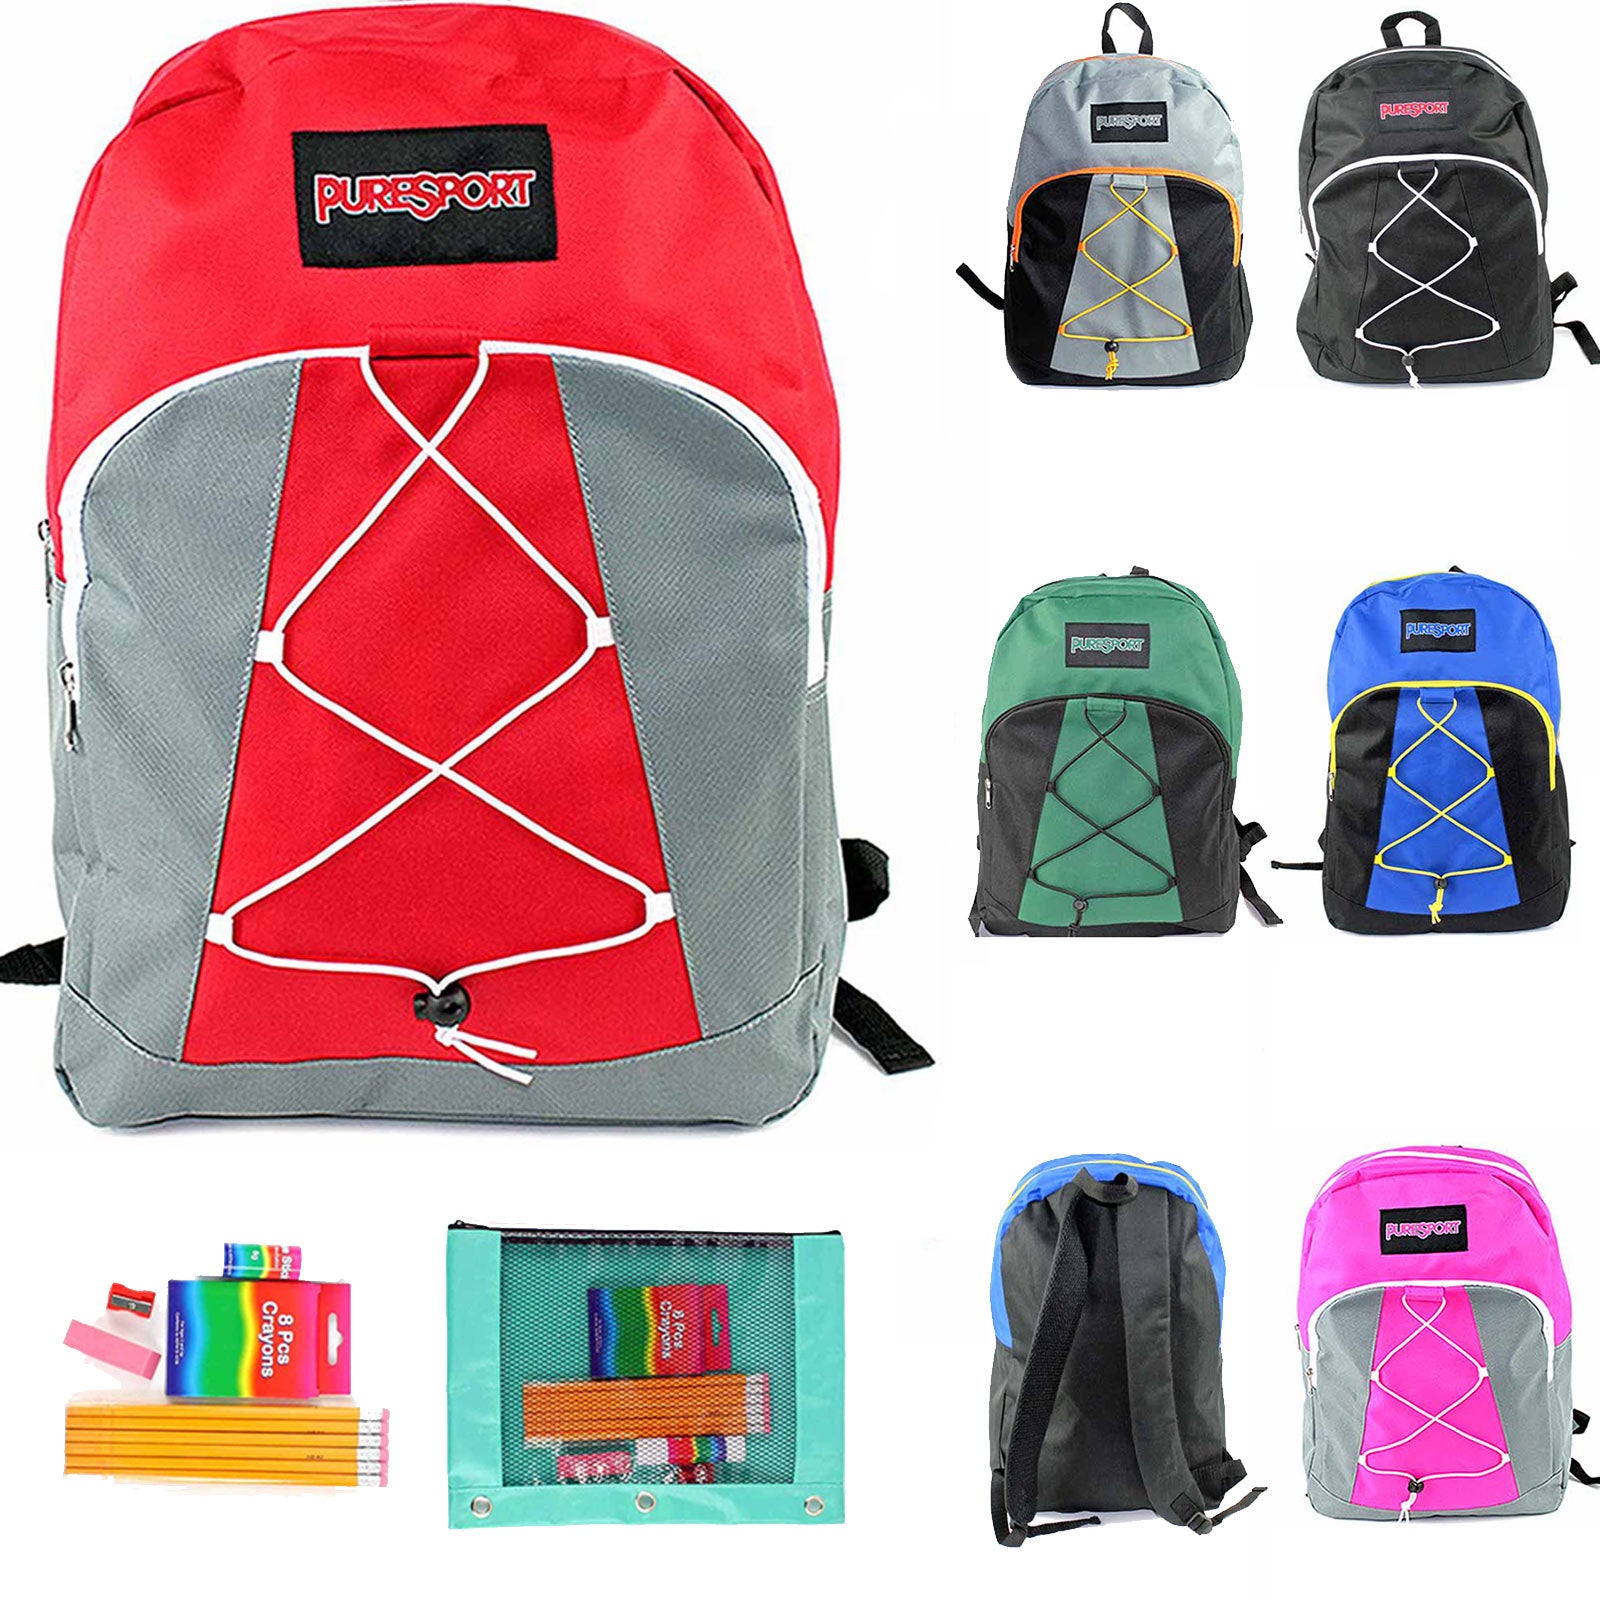 bungee wholesale backpacks with elementary school supply kits for back to school